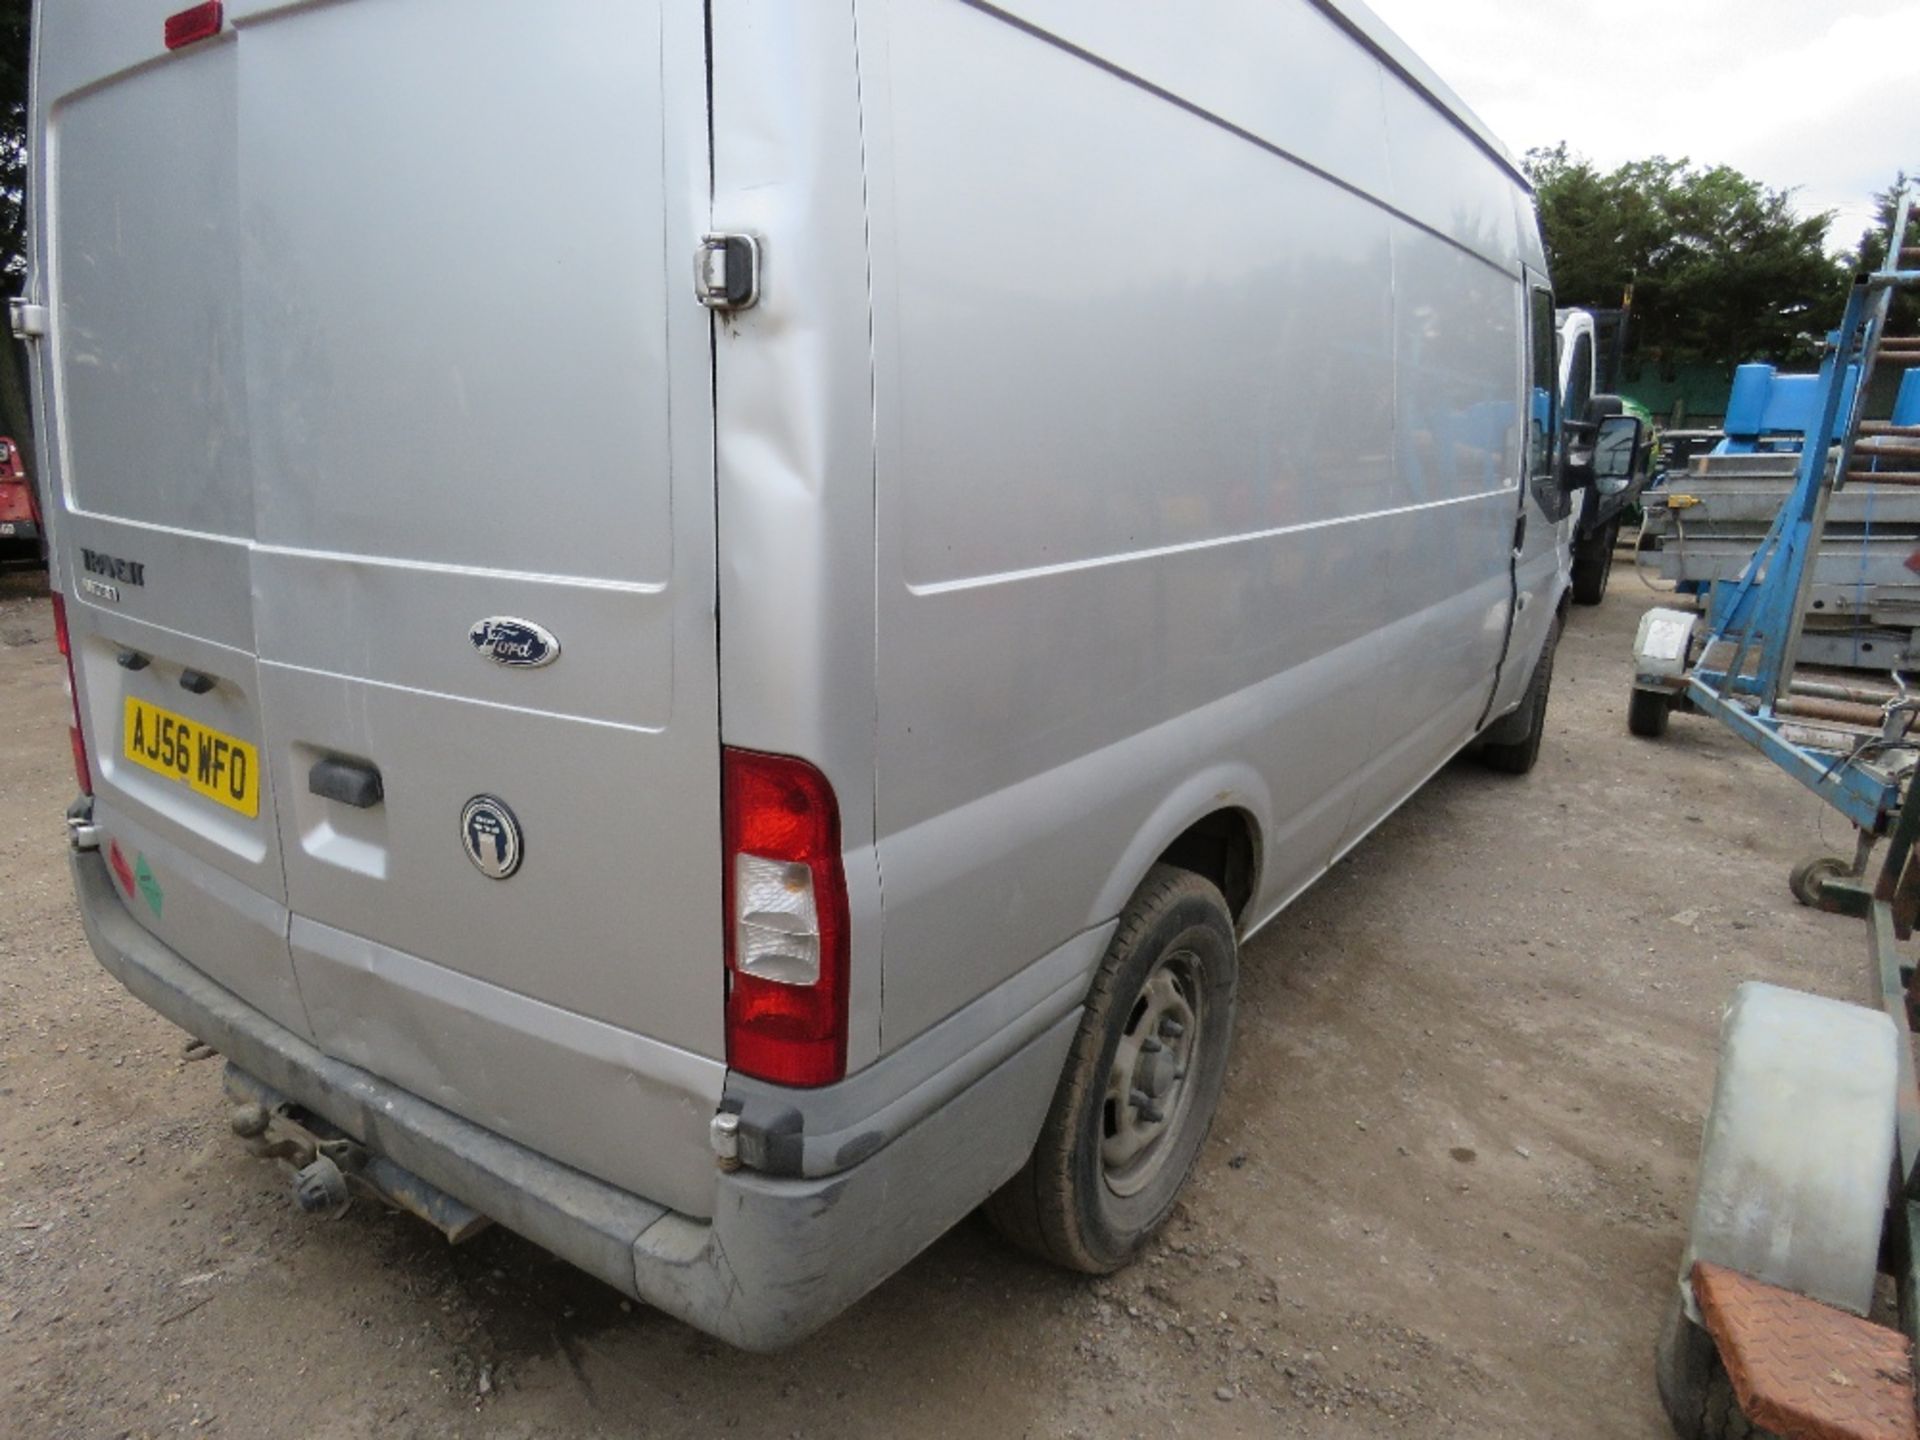 FORD TRANSIT 115T350 PANEL VAN, TEST EXPIRED, WITH V5 REG: AJ56 WFO WHEN TESTED WAS SEEN TO DRIVE - Image 5 of 5